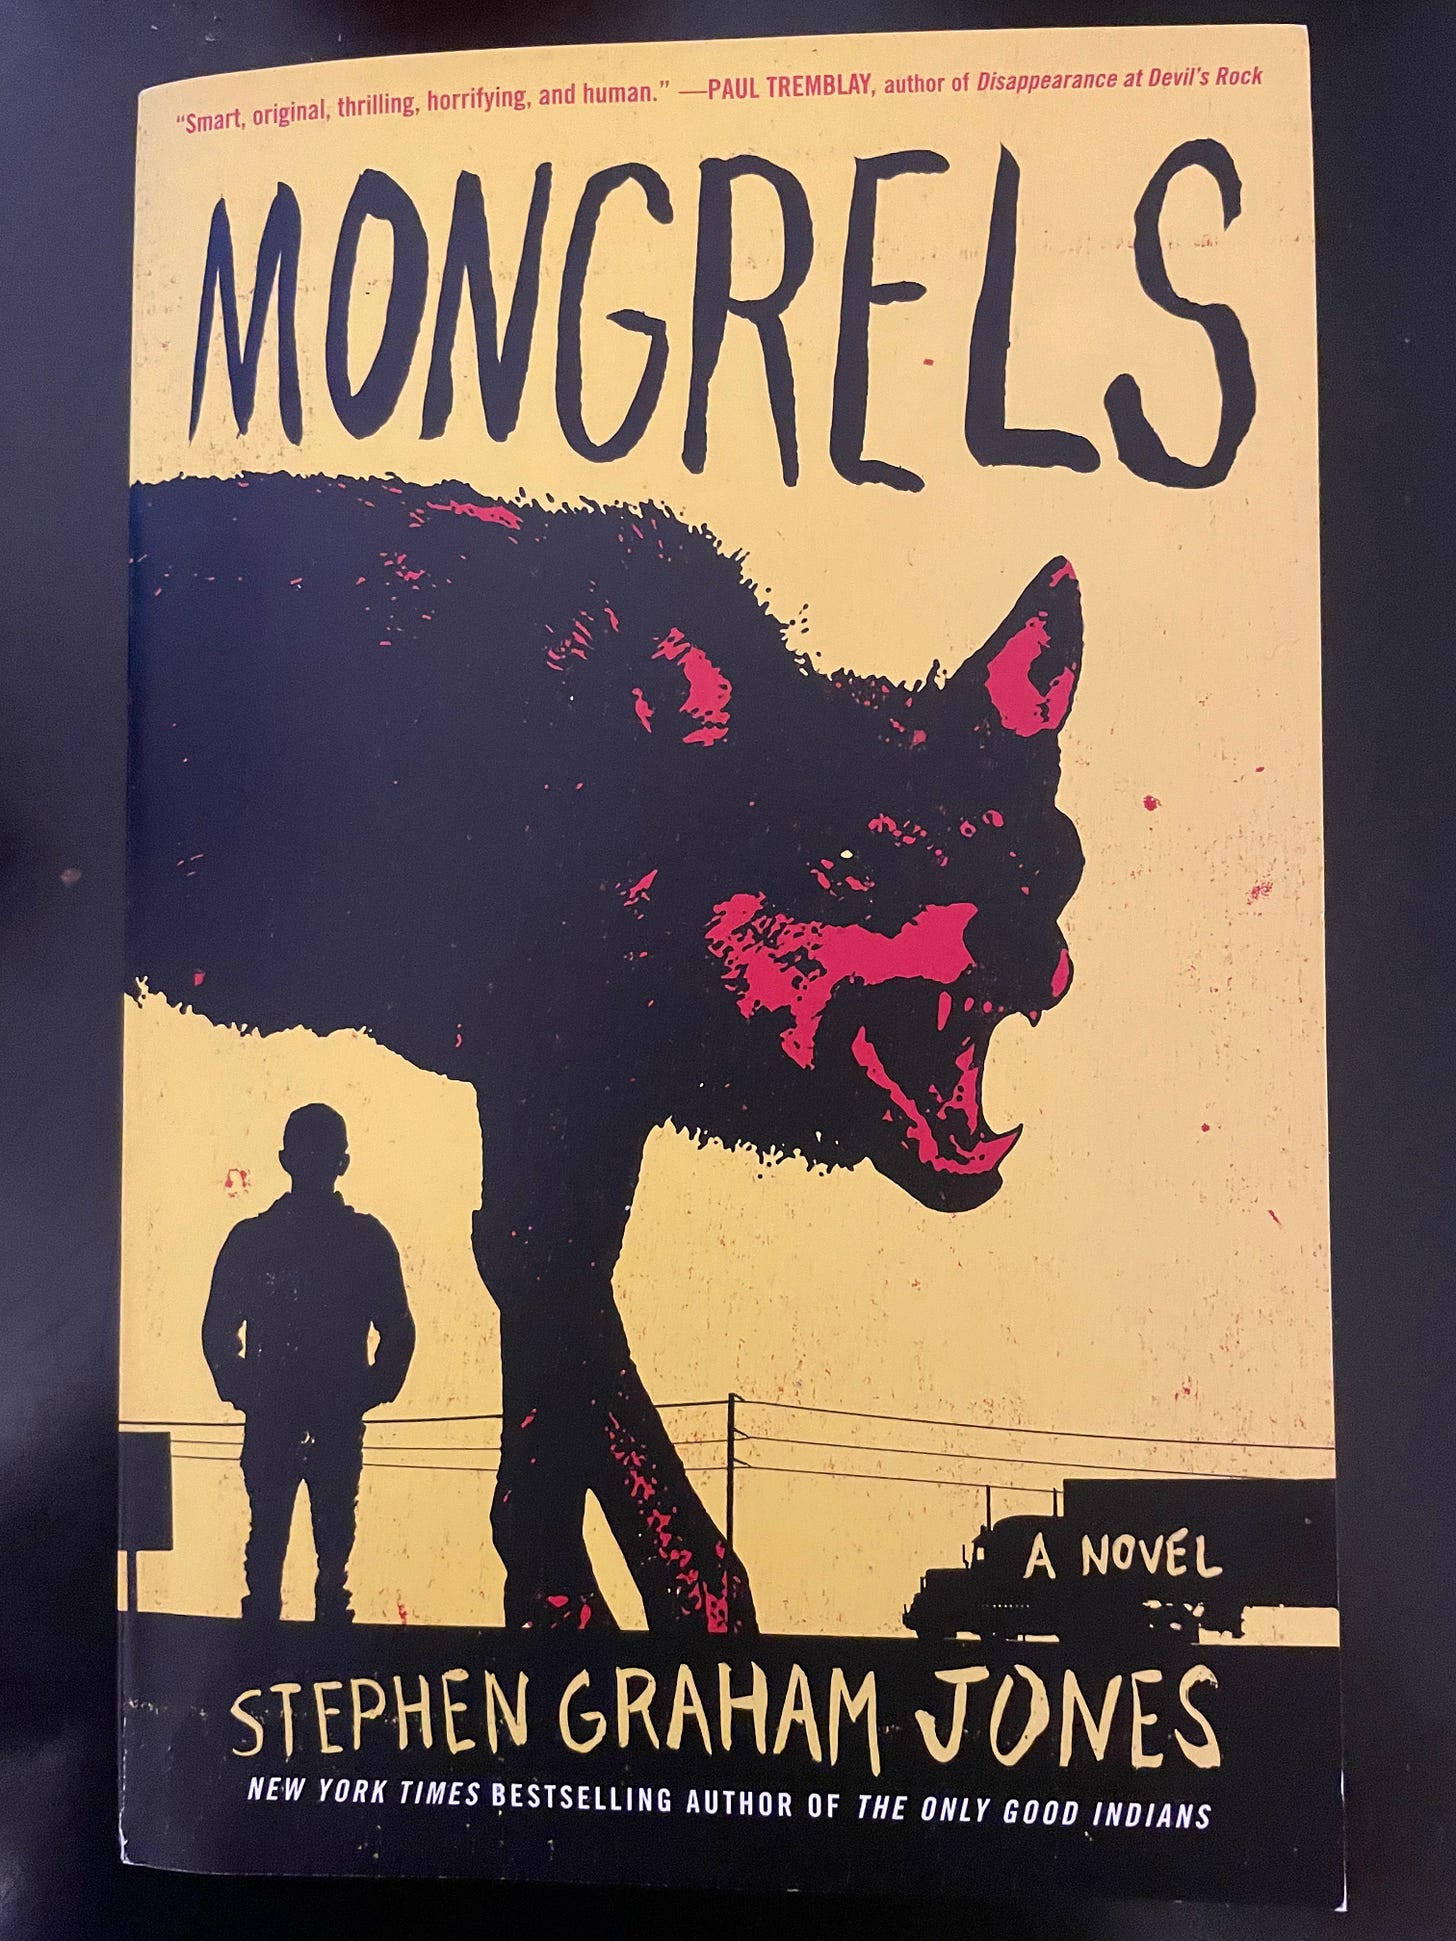 book: 'Mongrels' by Stephen Graham Jones. The cover is black and yellow with a red and black wolf and the silhouette of a boy against telephone phones and a semi truck